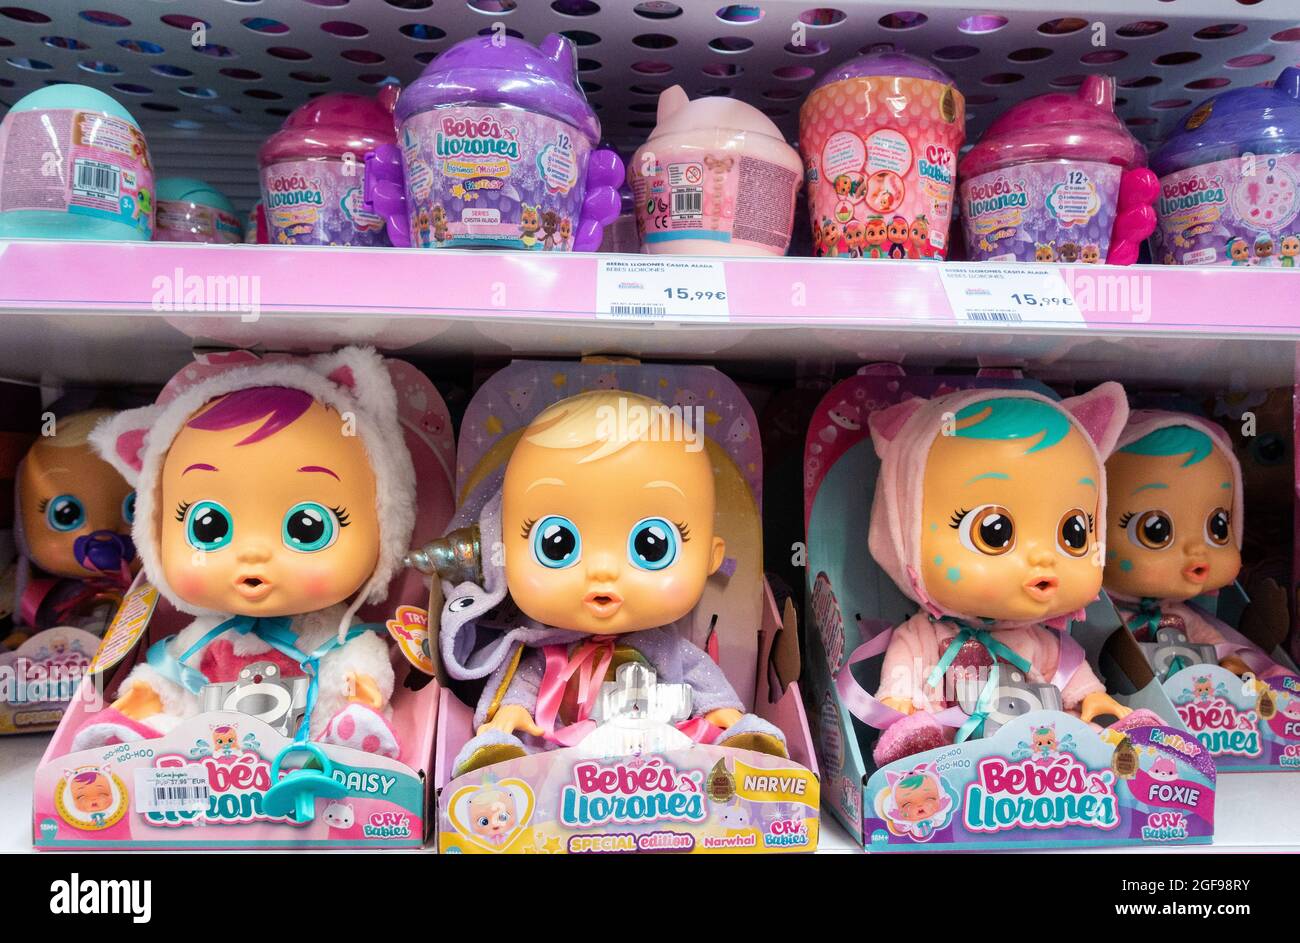 Cry Babies dolls (Bebes Llorones in Spanish) in toy store in Spain Stock  Photo - Alamy